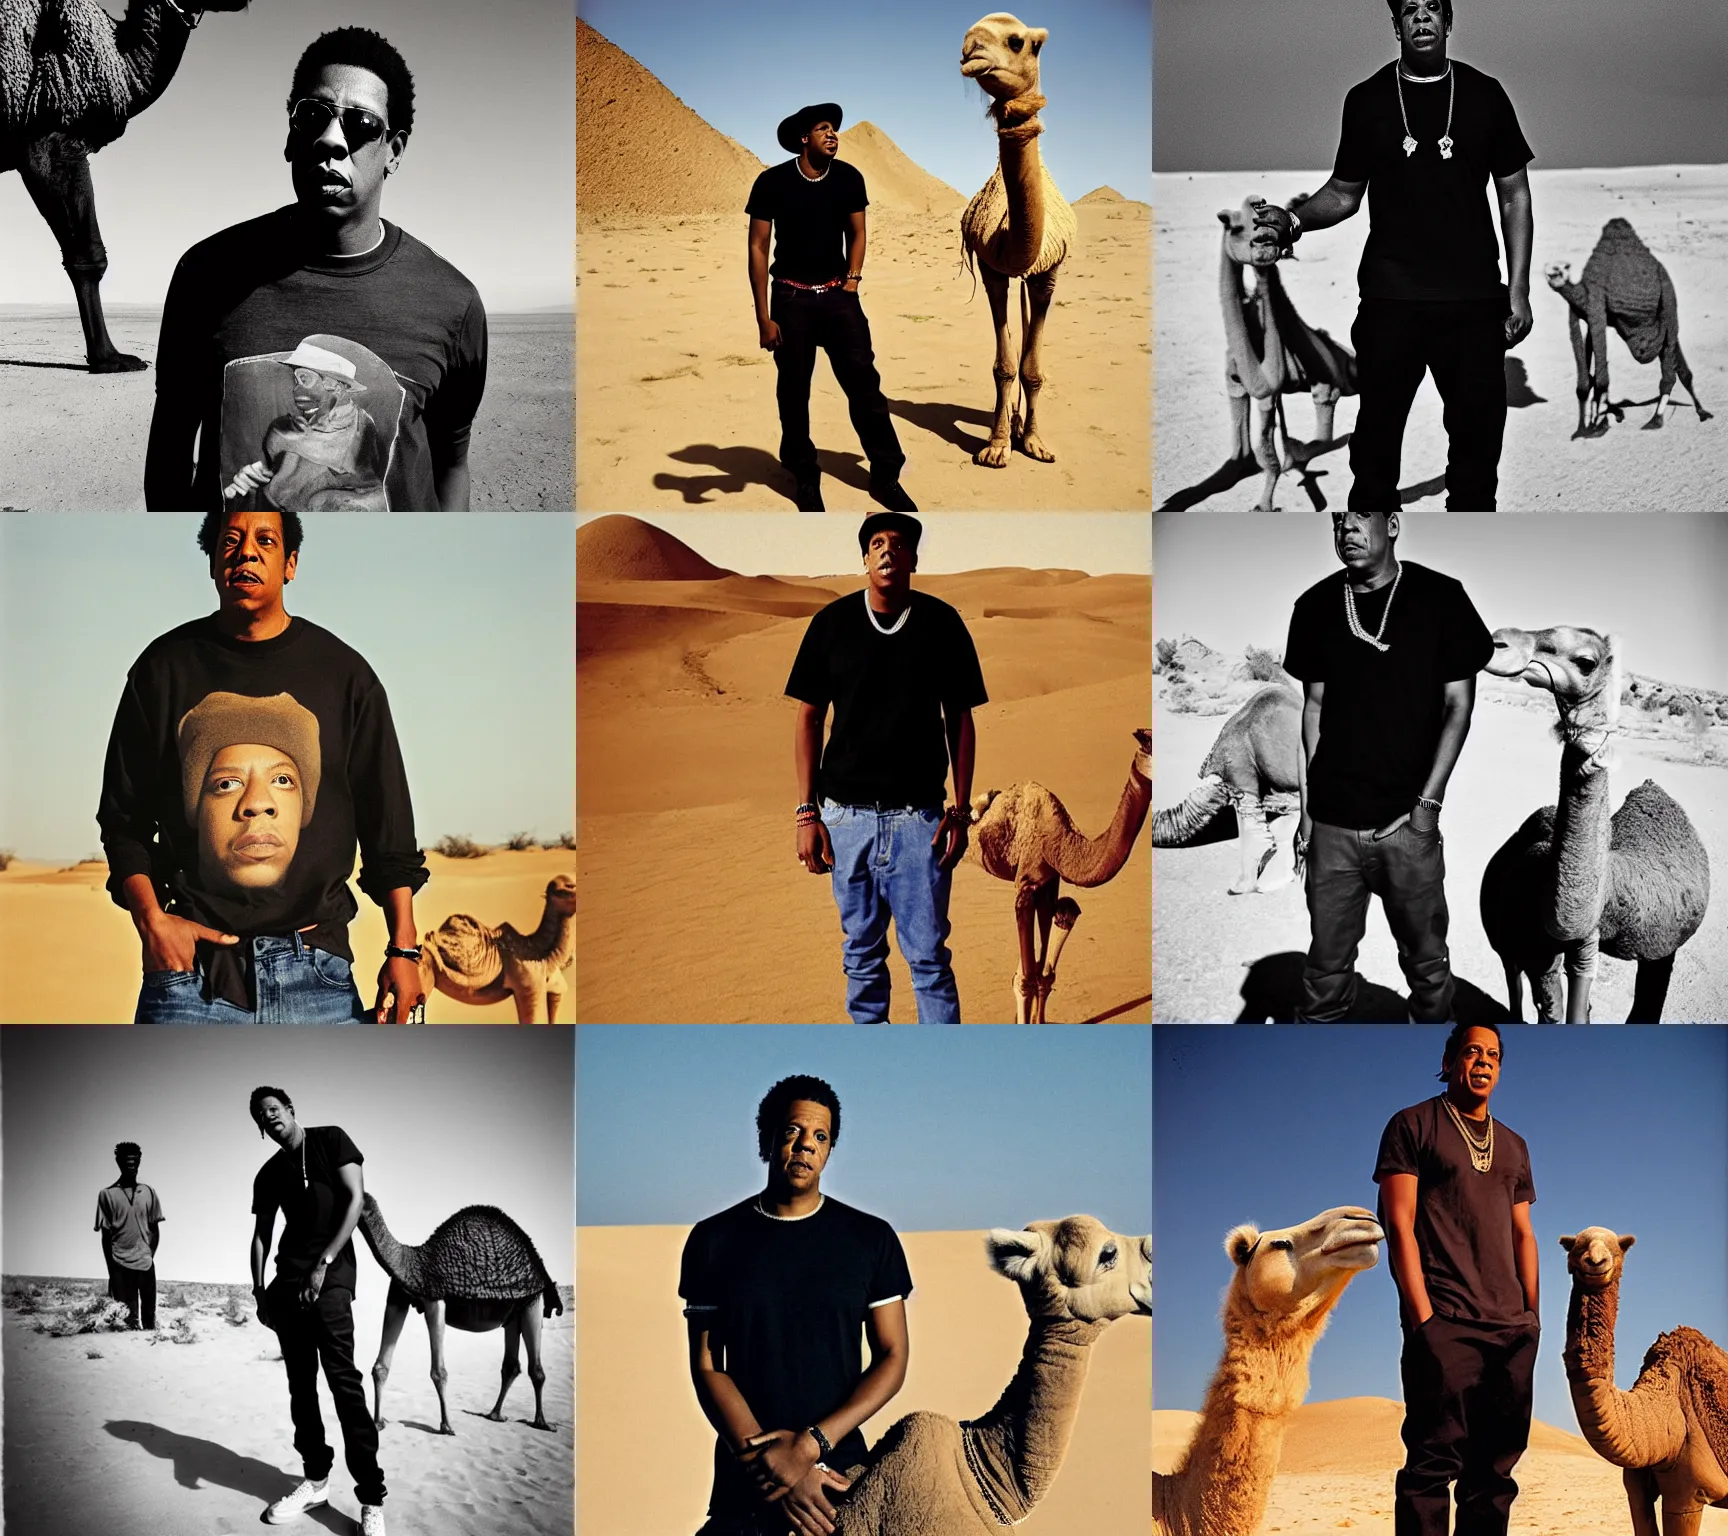 Prompt: portrait of jay - z shawn carter wearing a black t - shirt and skinny jeans, standing next to a camel, sand desert fantasy, photogarphy by helen levitt, good lighting, no blur